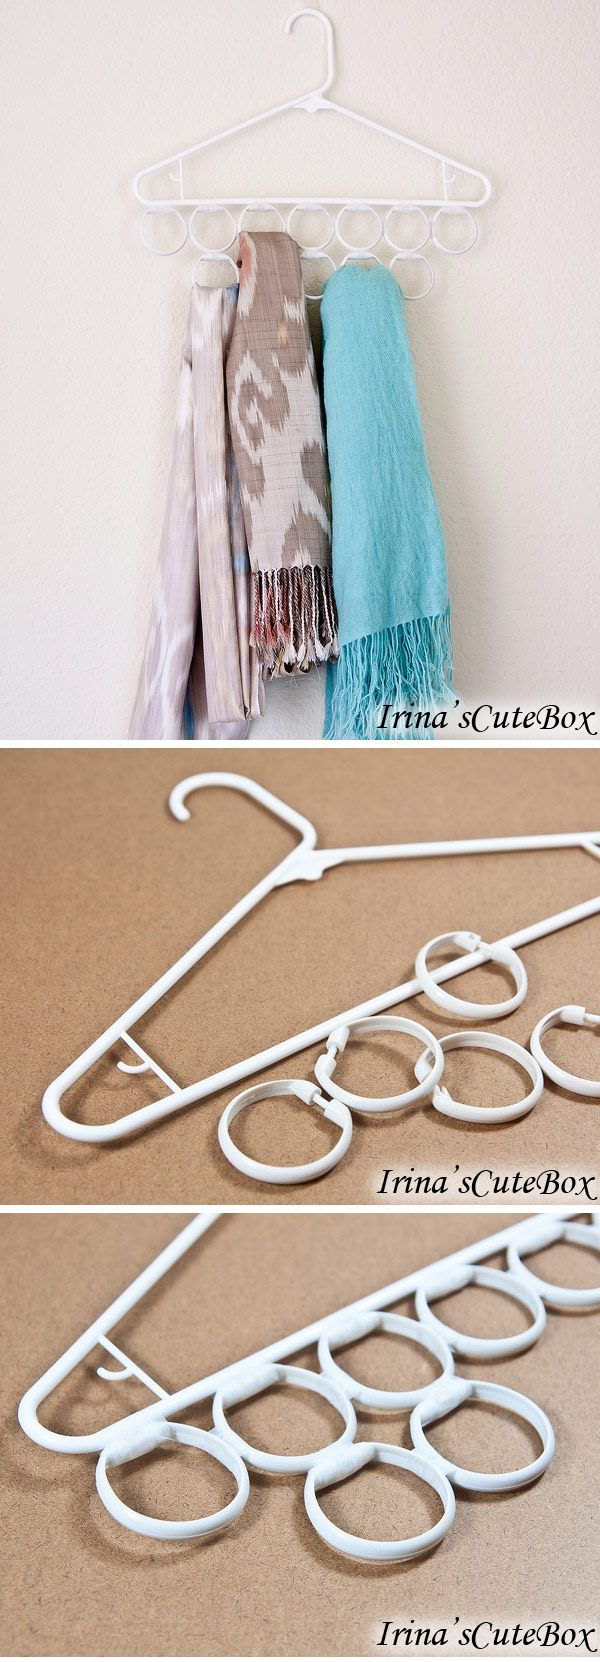 Inexpensive scarf holder made of clothes hangers and shower curtain rings